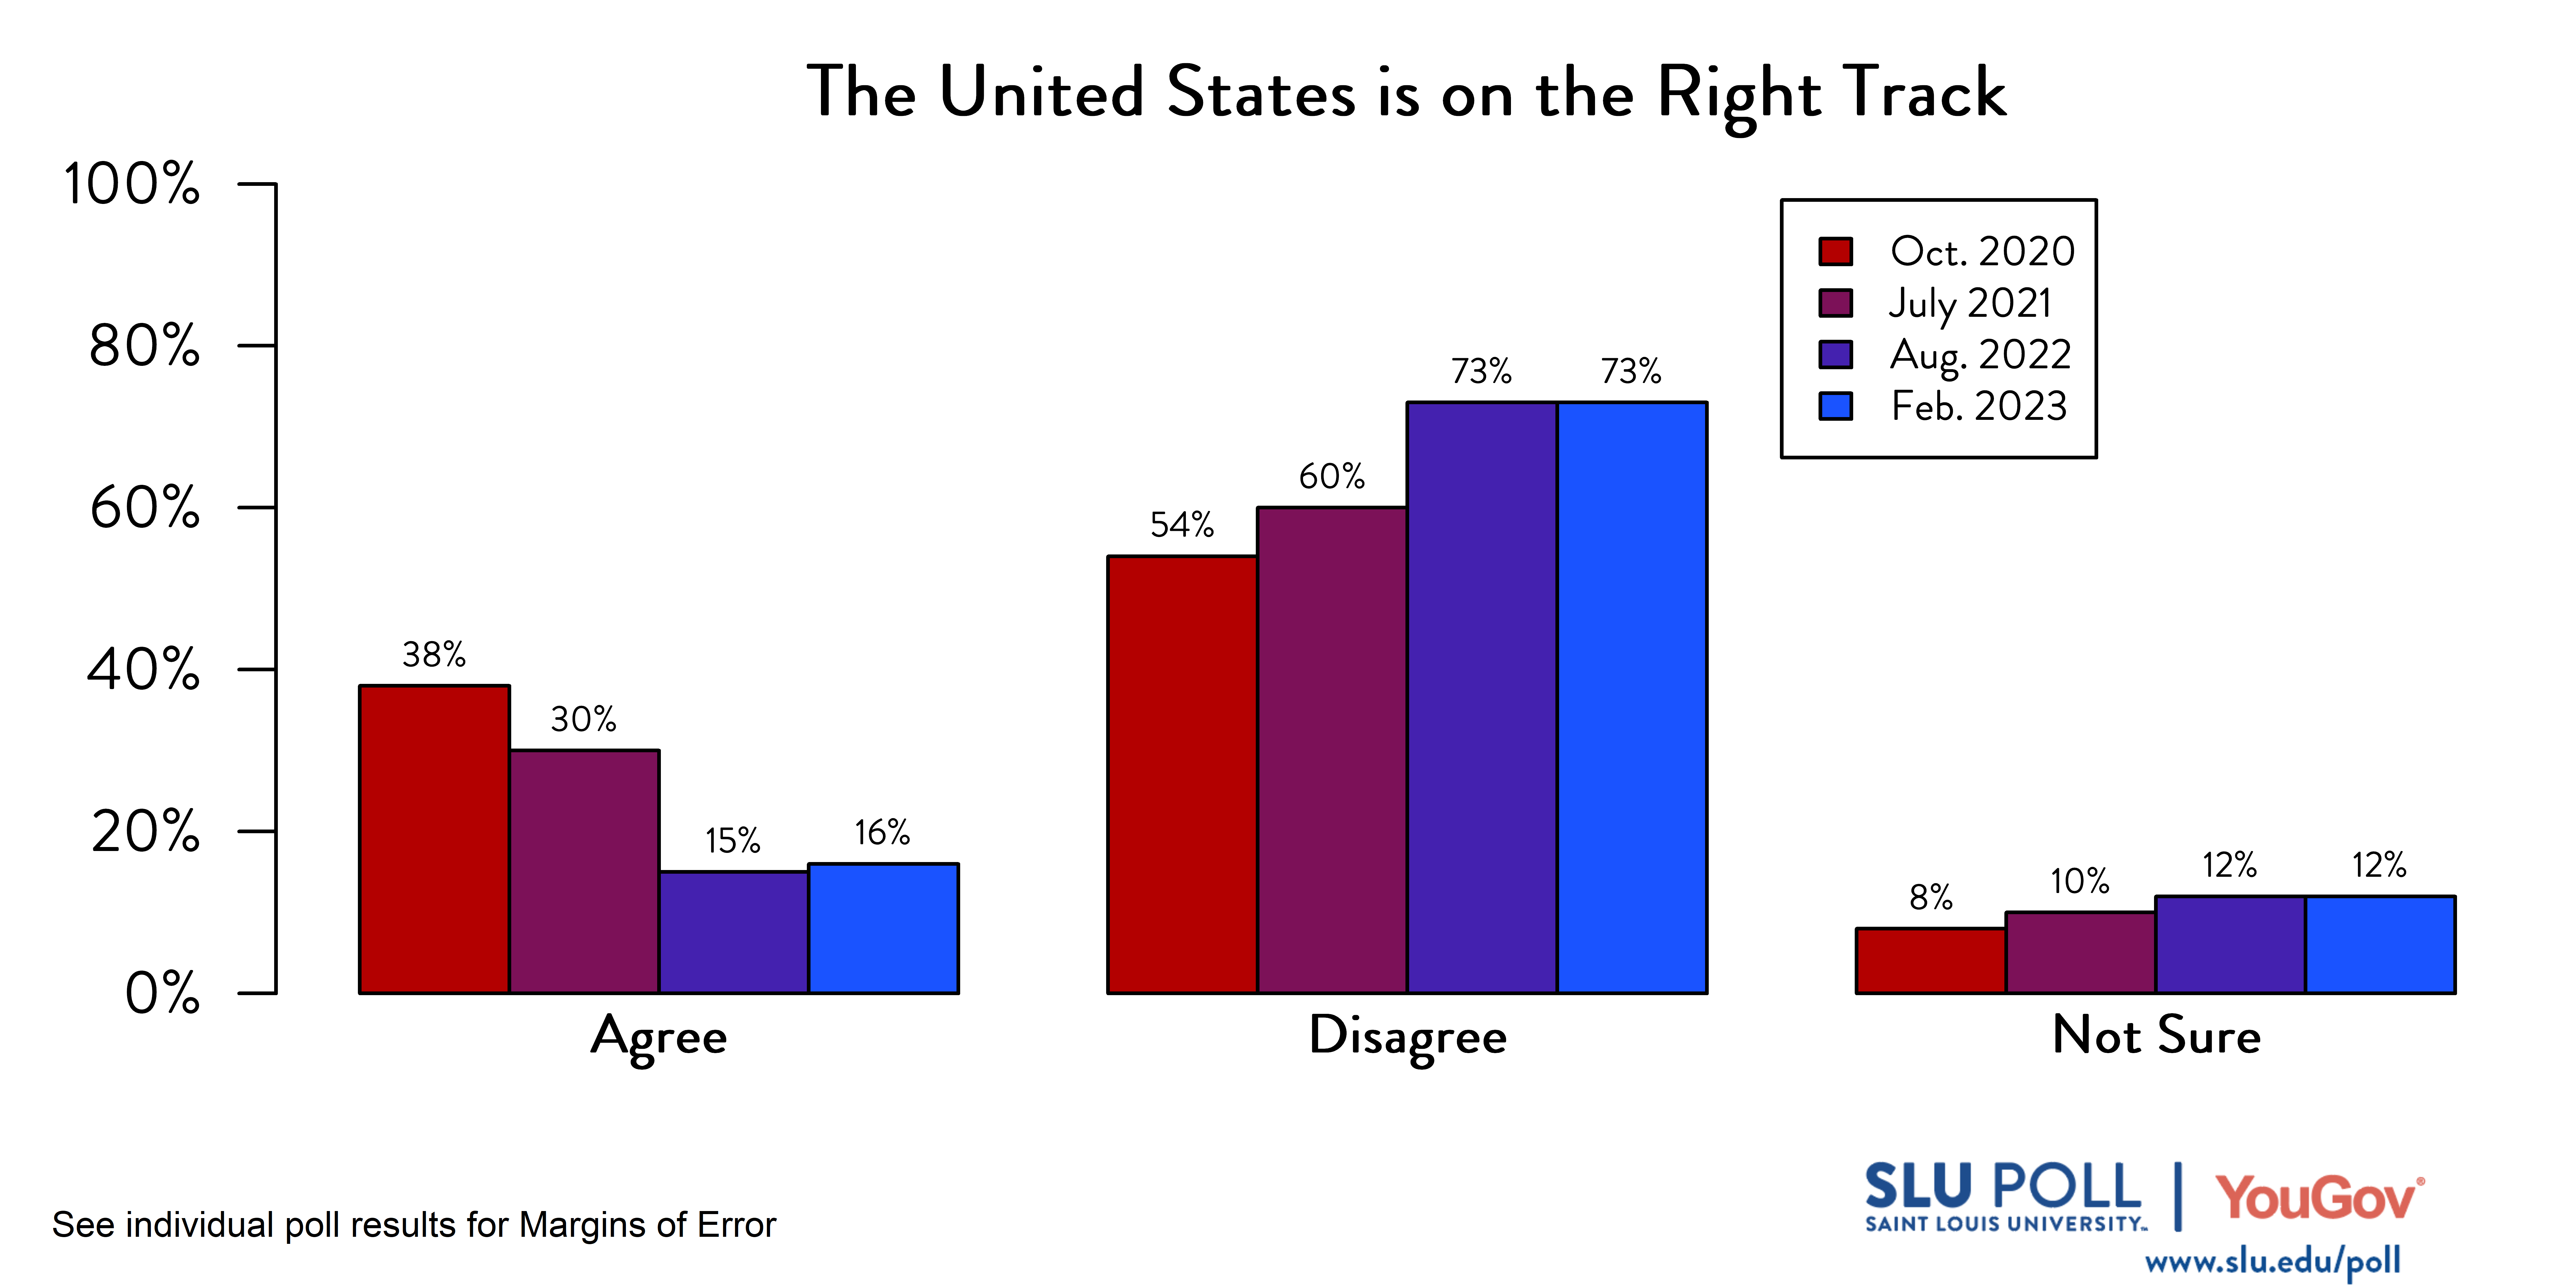 Likely voters' responses to 'Do you agree or disagree with the following statements: The United States is on the right track and headed in a good direction?': February 2023 Responses: 16% Agree, 73% Disagree, and 12% Not sure. August 2022 Responses: 15% Agree, 73% Disagree, and 12% Not Sure. July 2021 Responses: 30% Agree, 60% Disagree, and 10% Not Sure. Oct. 2020 Responses: 38% Agree, 54% Disagree, and 8% Not Sure.